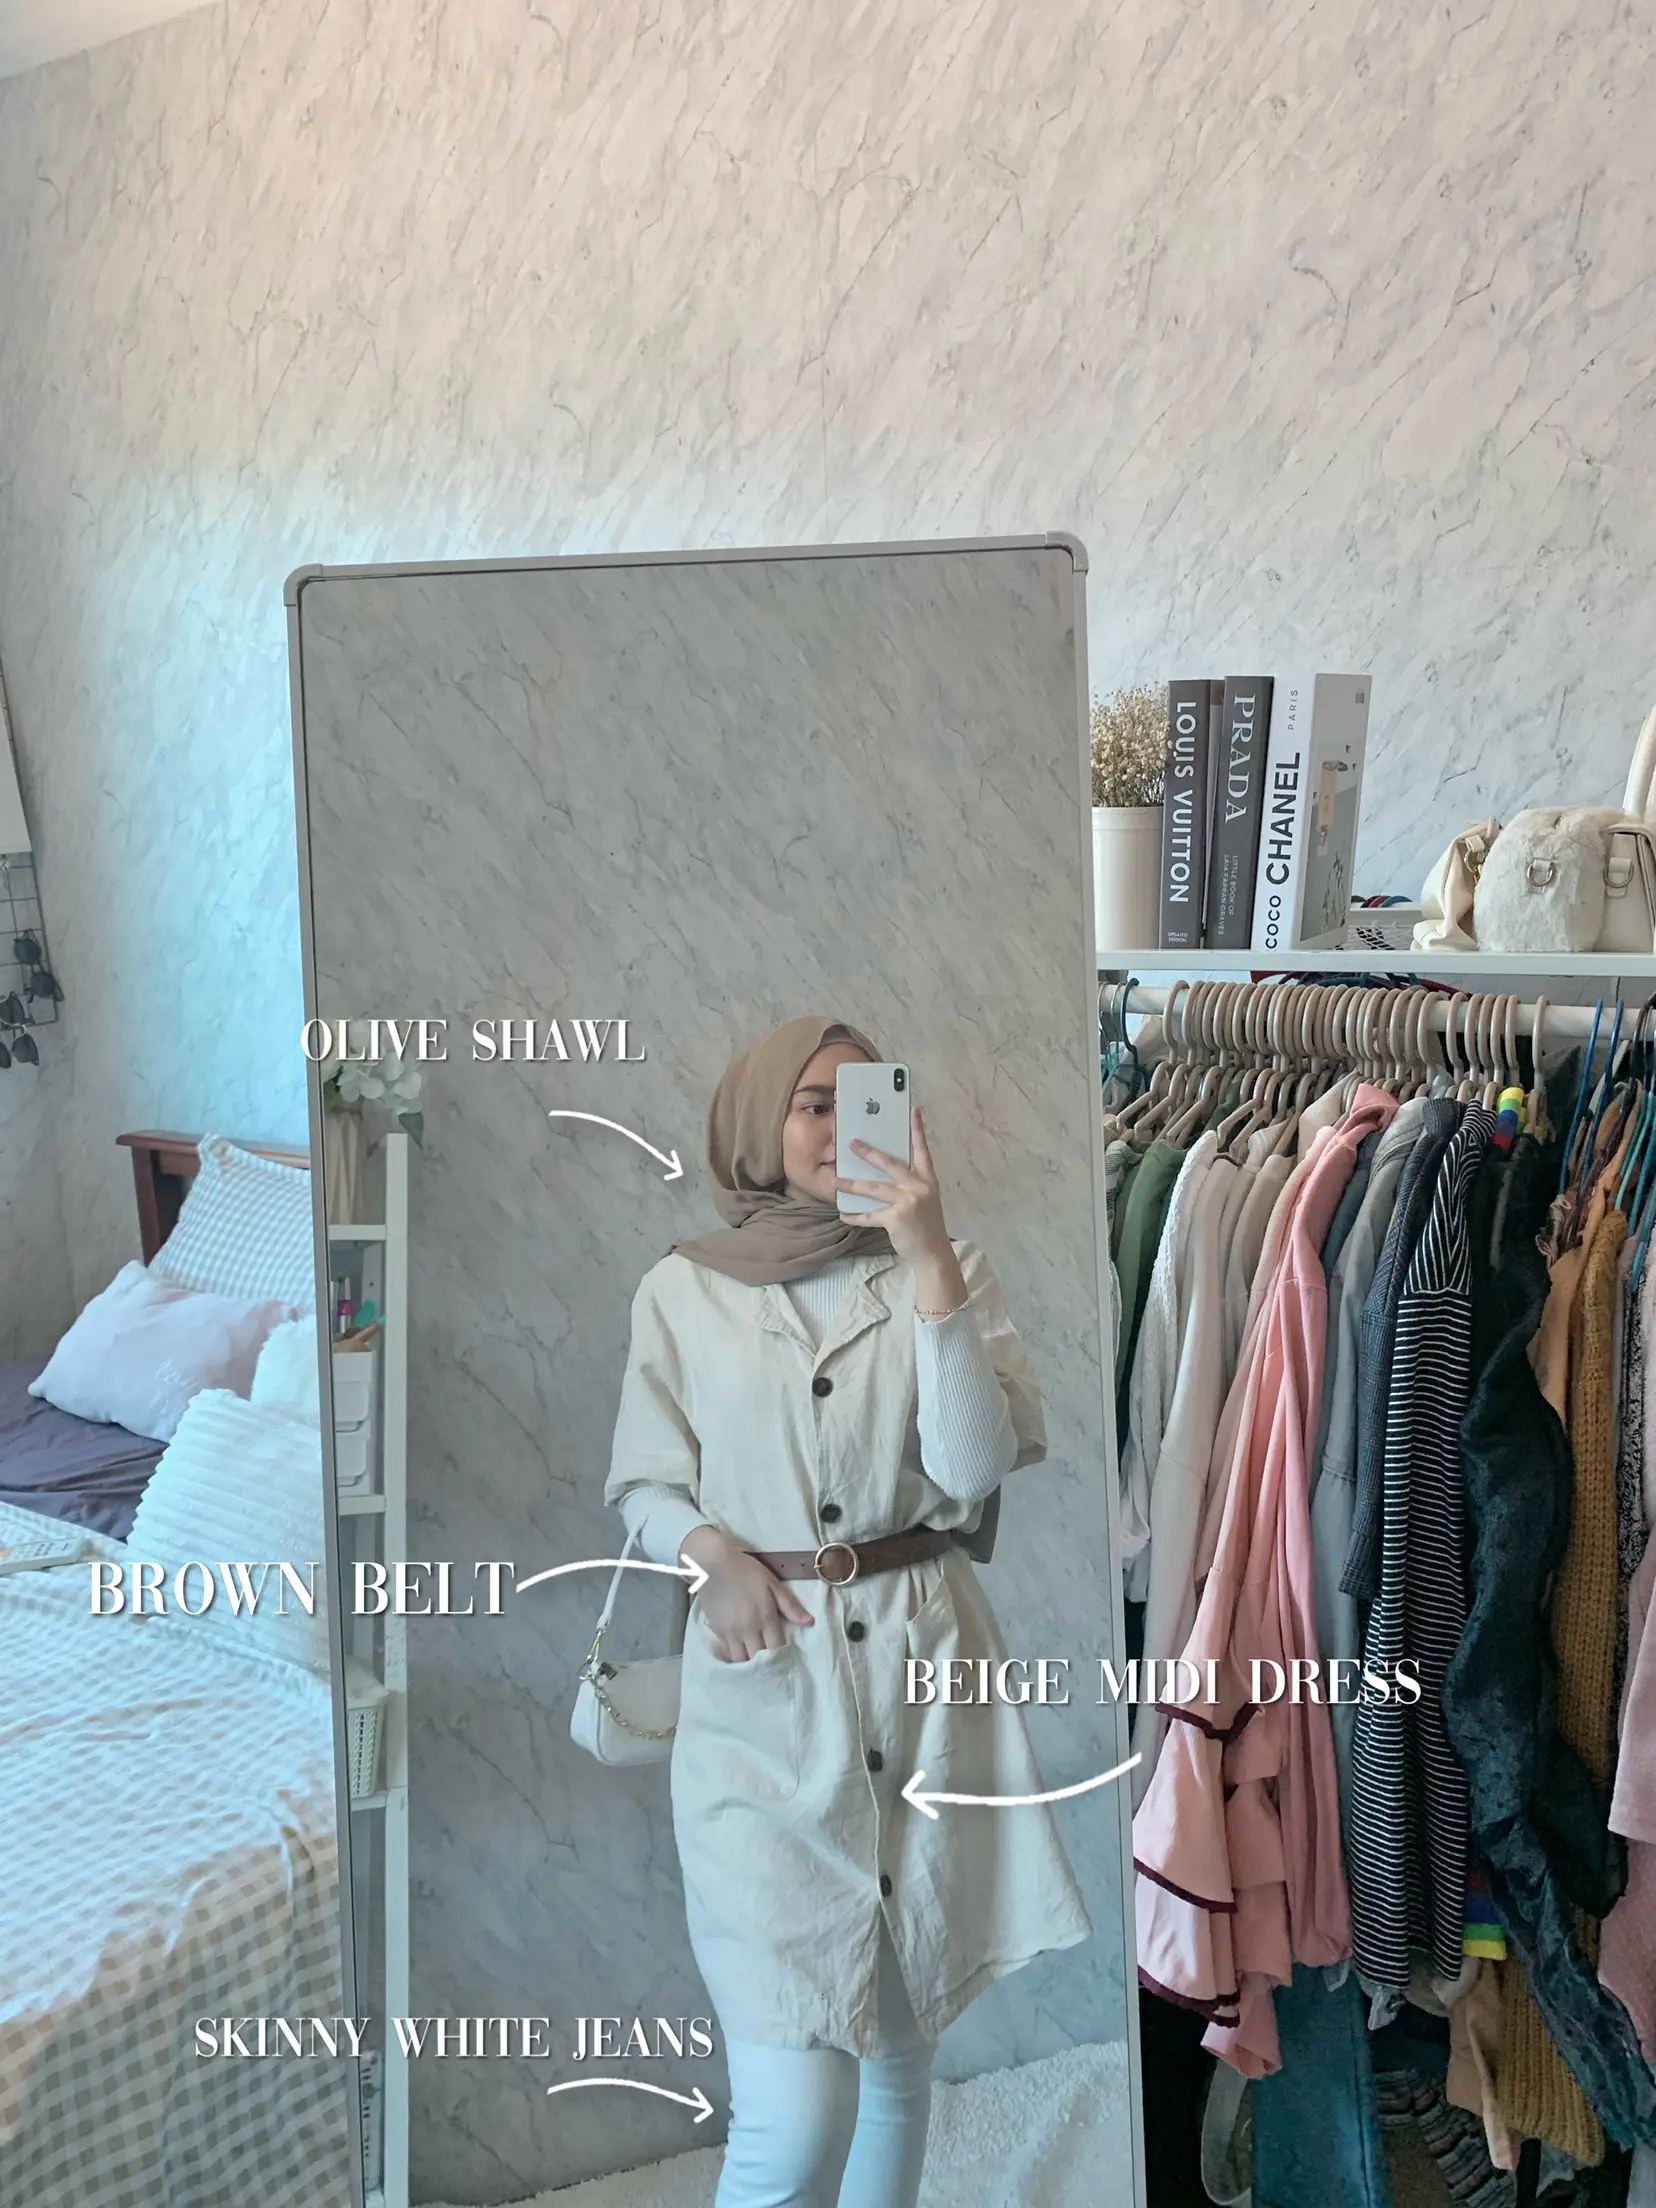 How to style clothes from thrift store🤍, Galeri disiarkan oleh ijatisshii